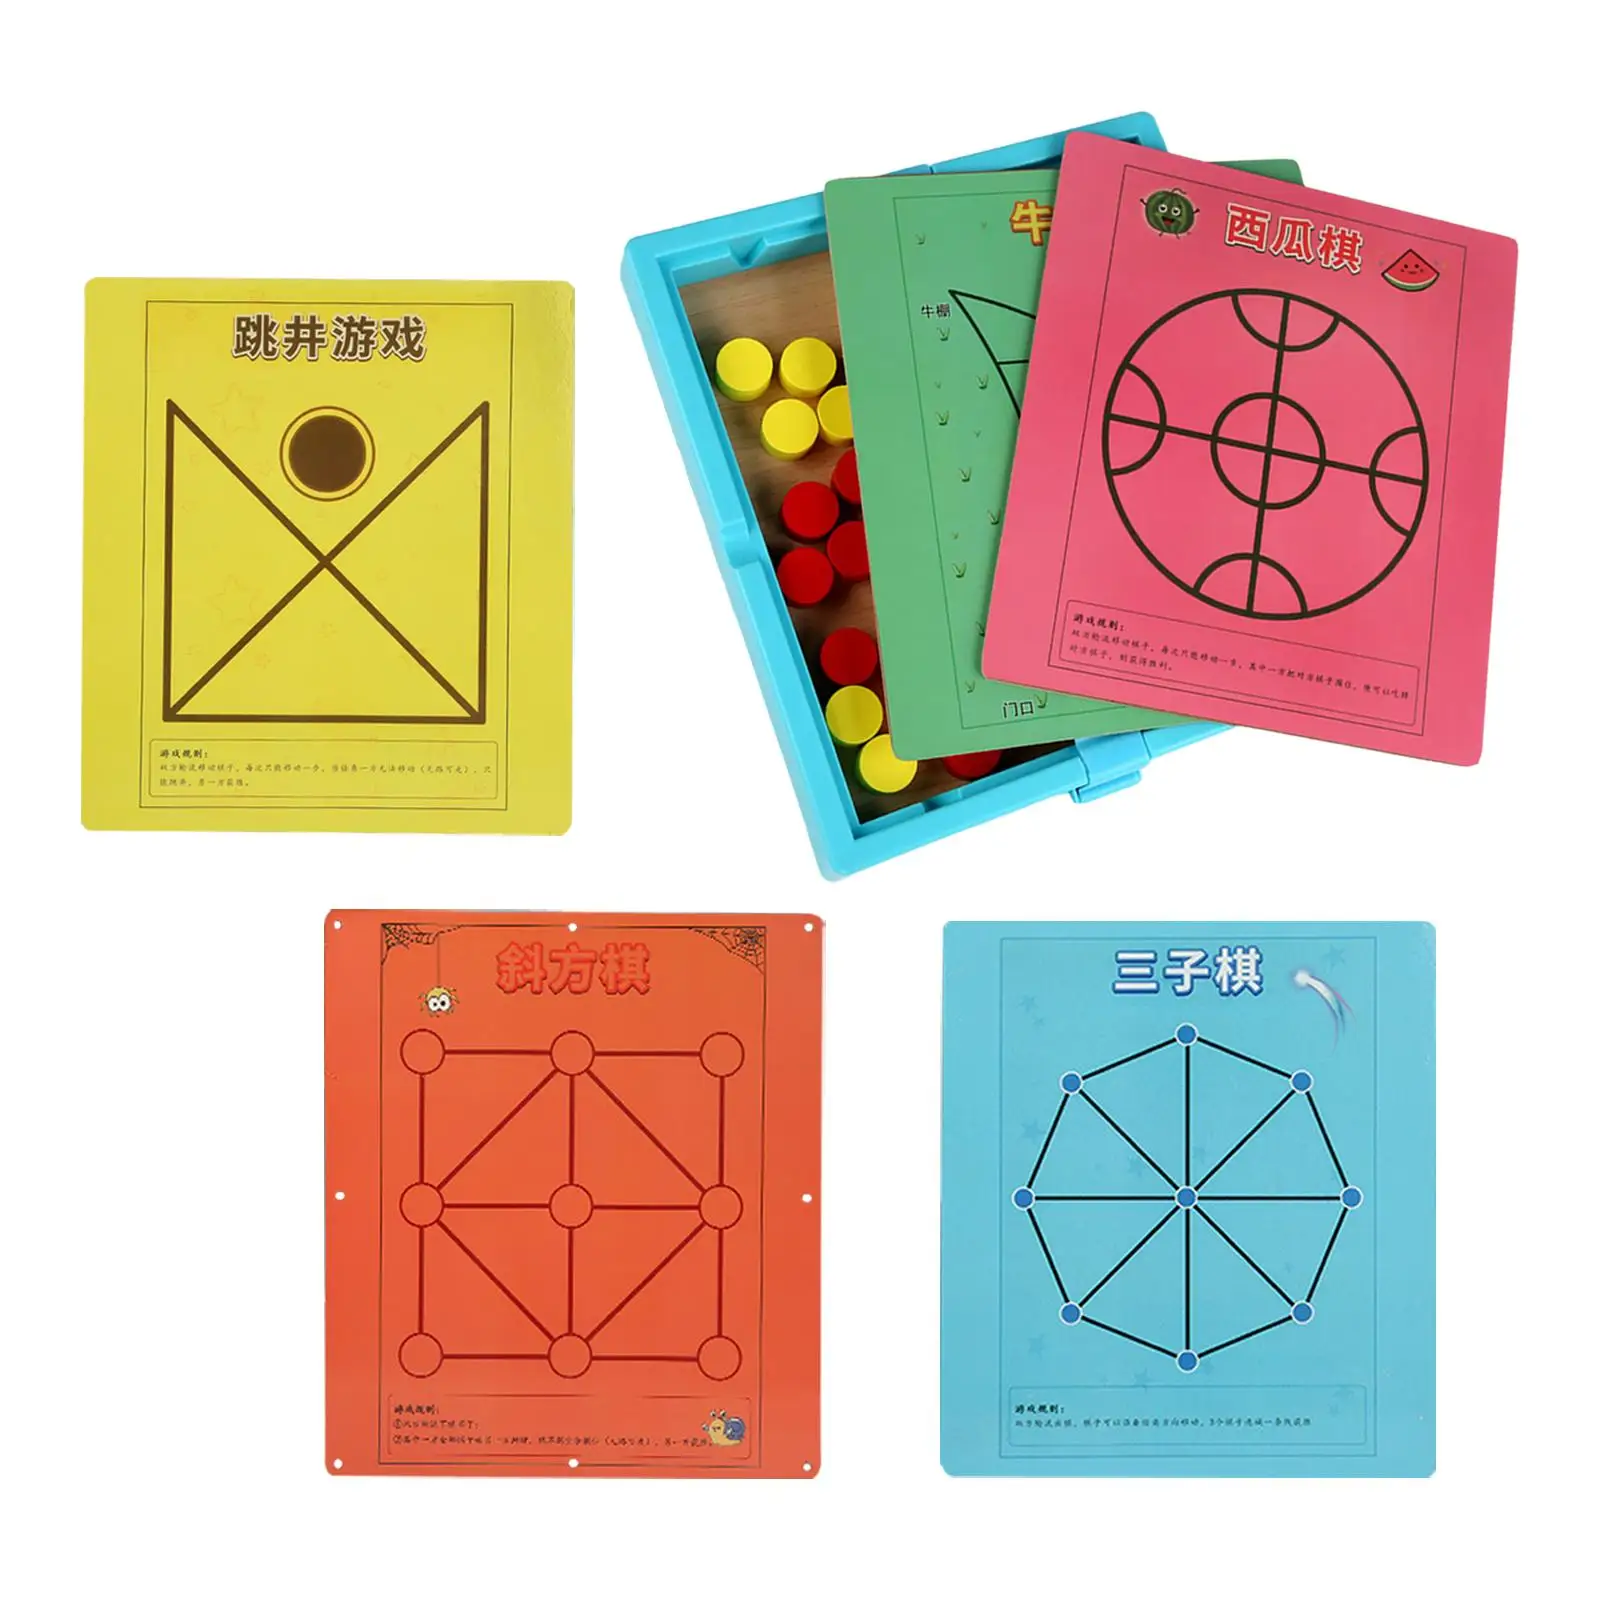 Travel 5 in 1 Board Game Traditional Puzzle Game Thinking Skills Teaching Aid Interactive Game for Preschool Entertainment Home